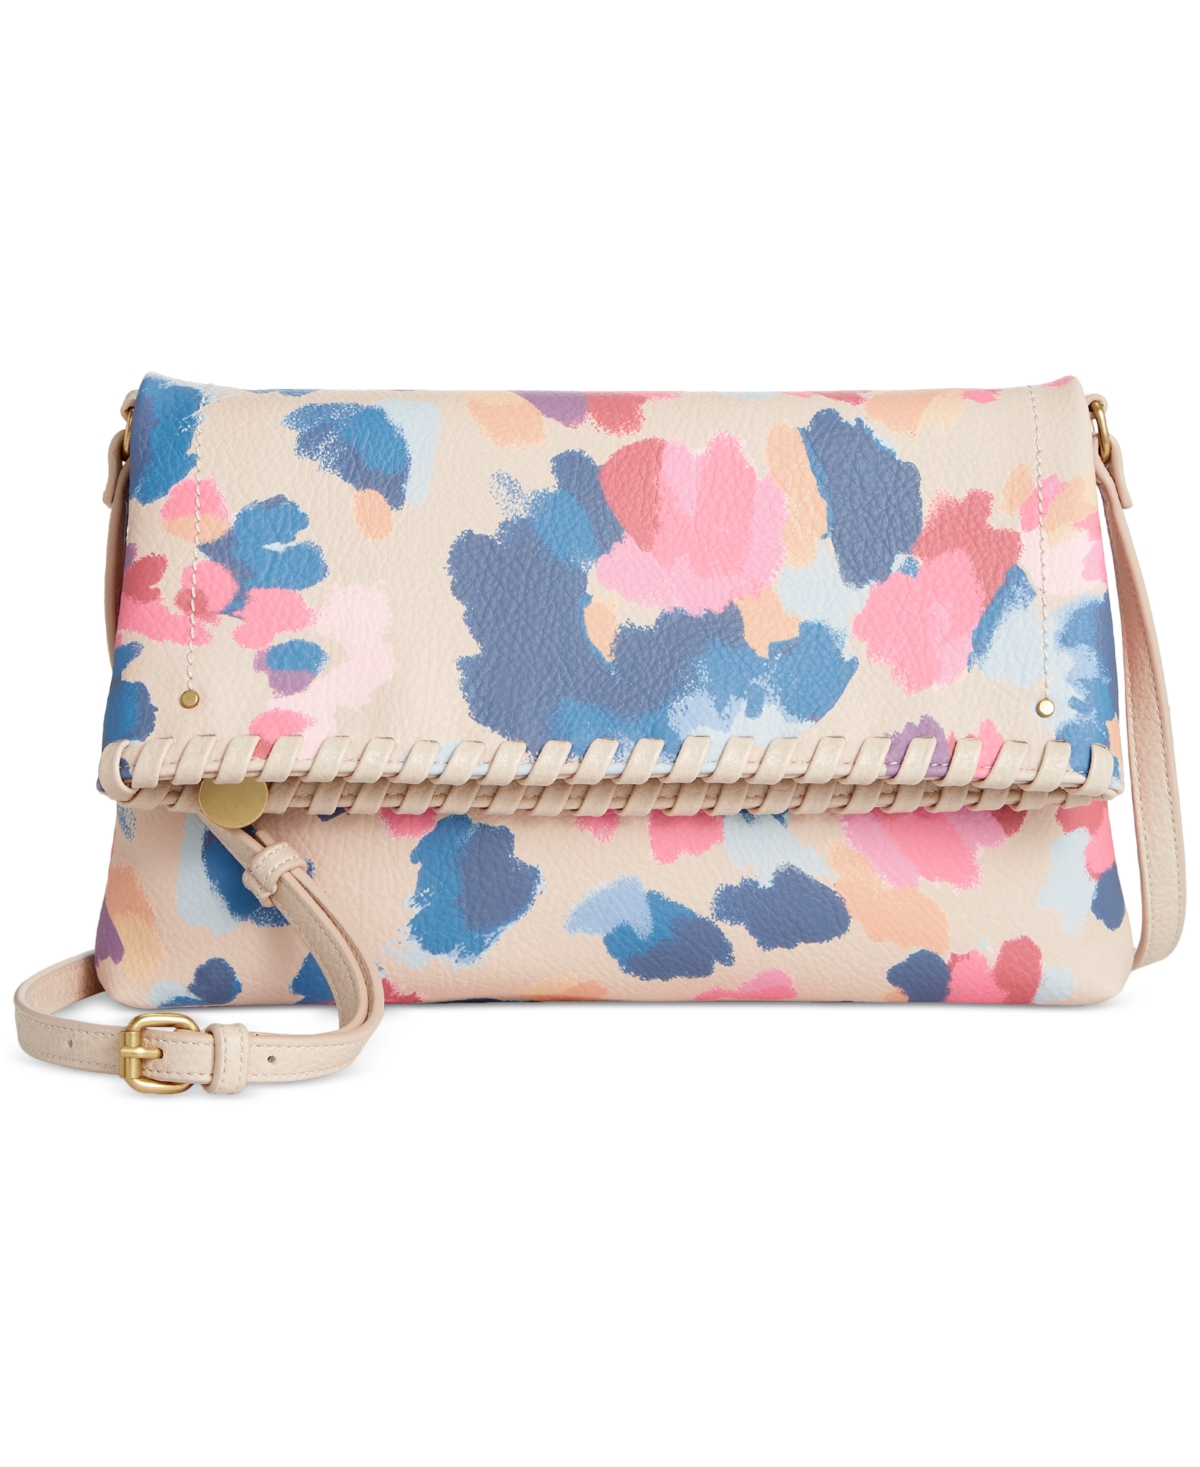 Whipstitch East West Flap Crossbody, Created for Macy's - Dream Dye Print